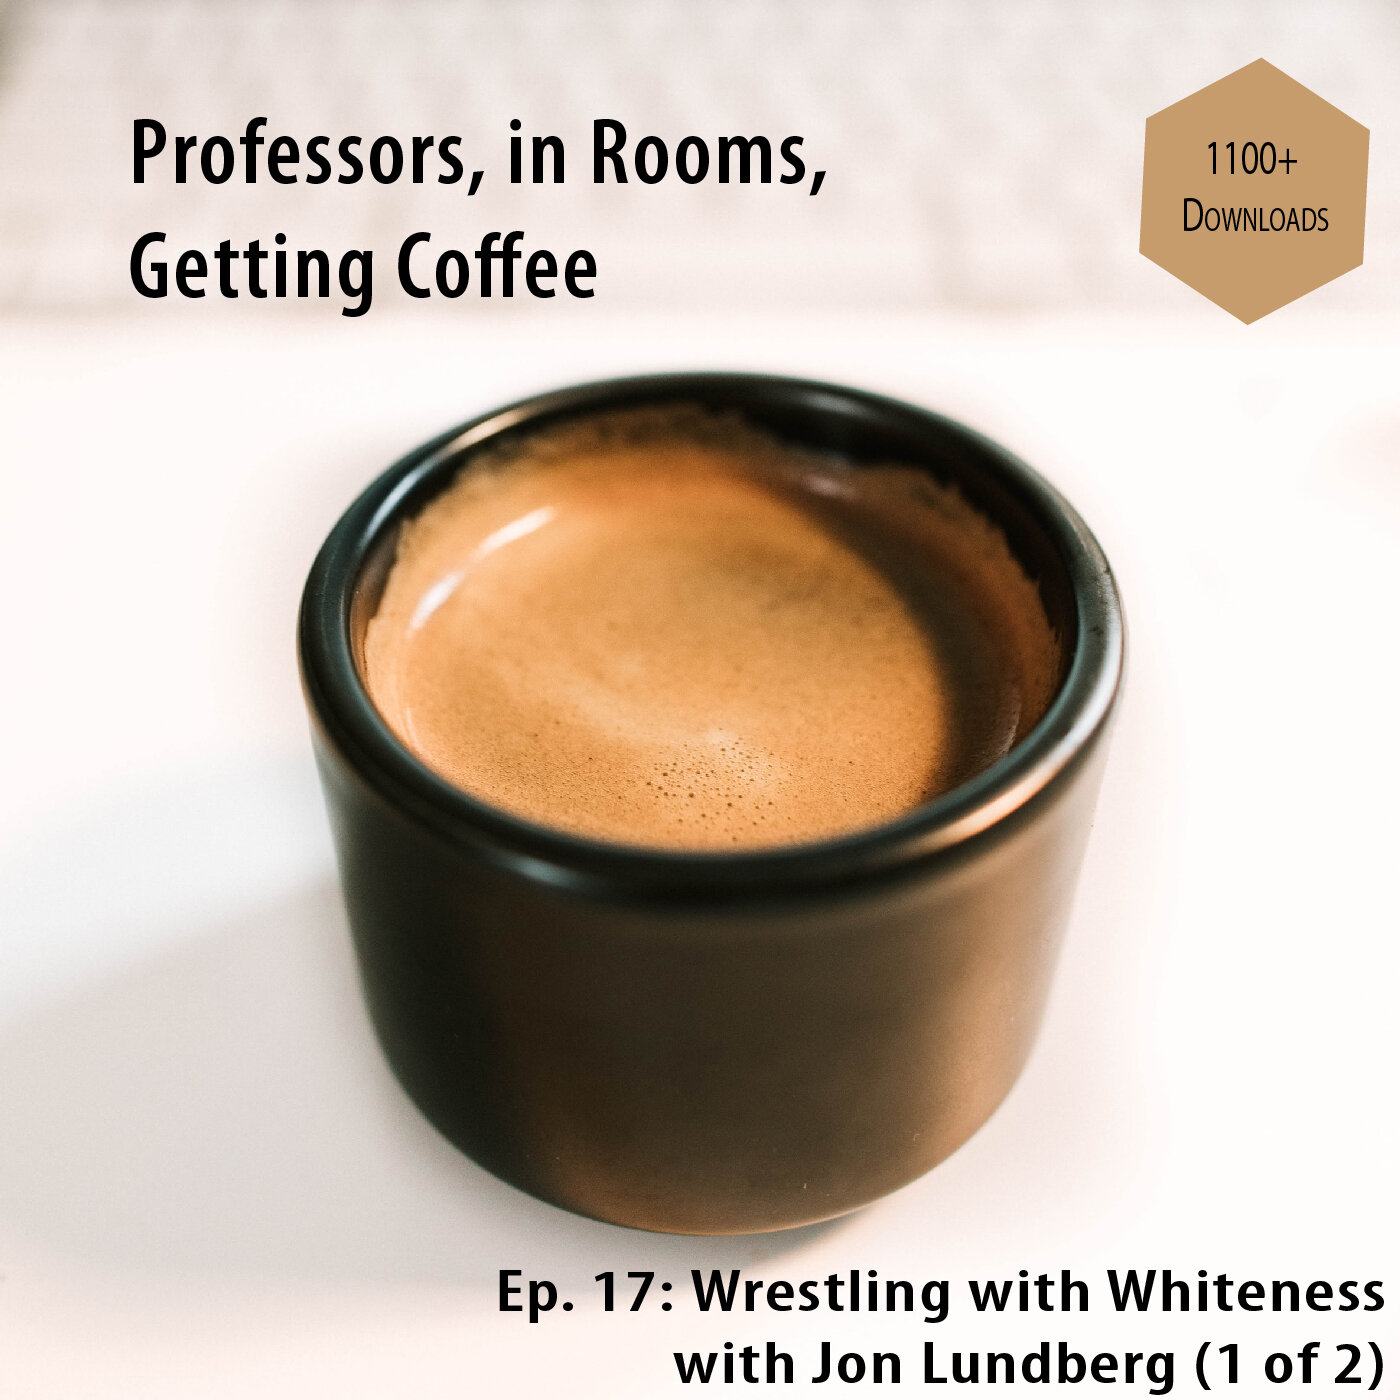 Wrestling with Whiteness with Jon Lundberg (1 of 2)